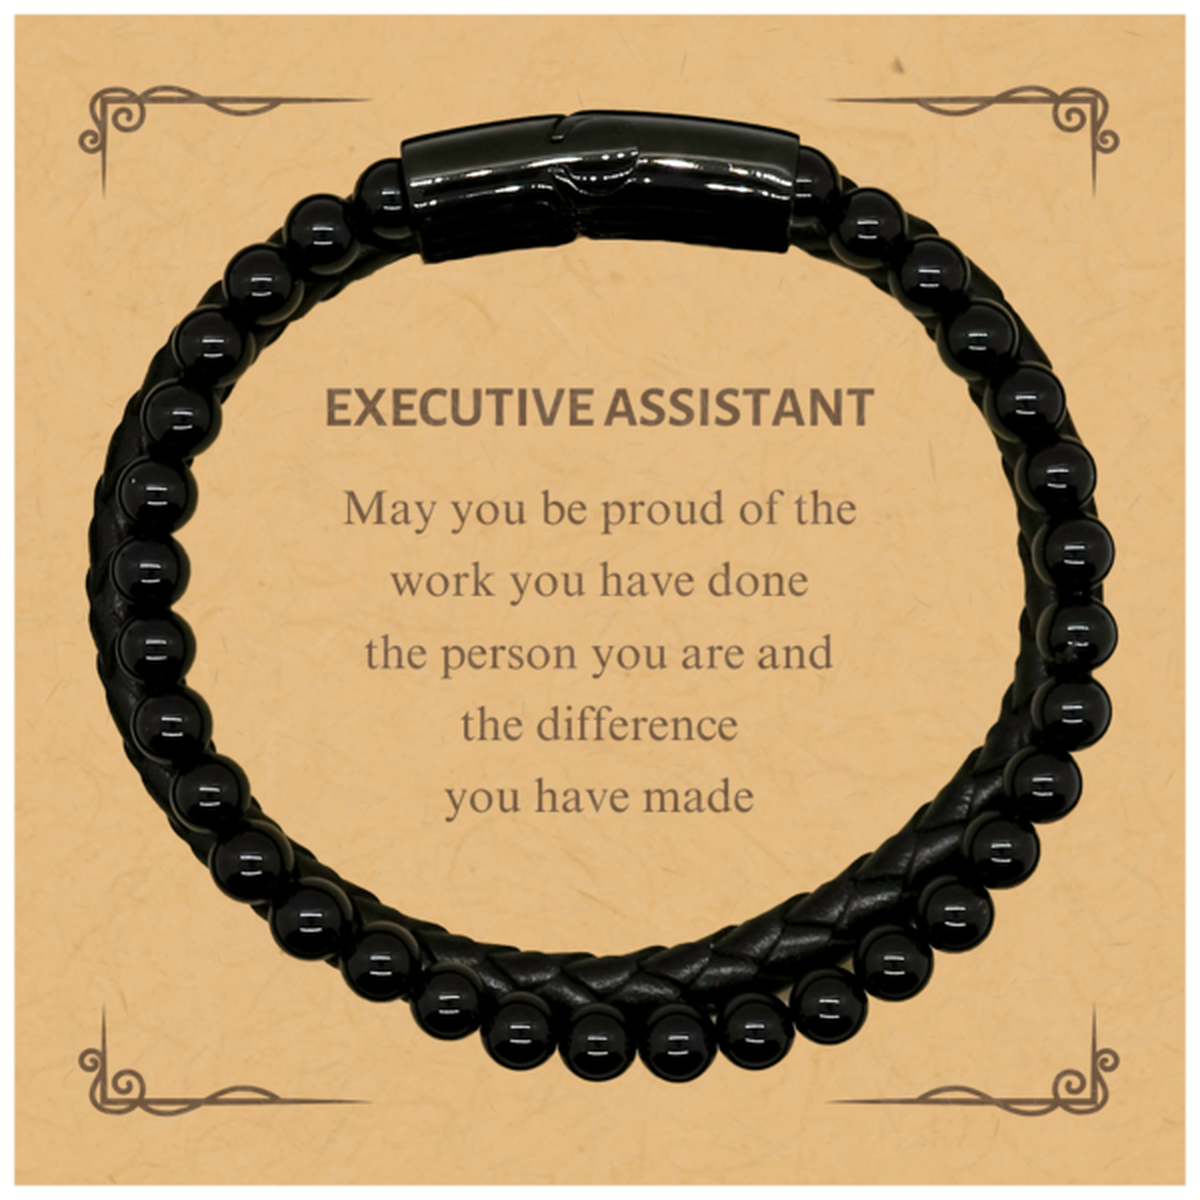 Executive Assistant May you be proud of the work you have done, Retirement Executive Assistant Stone Leather Bracelets for Colleague Appreciation Gifts Amazing for Executive Assistant